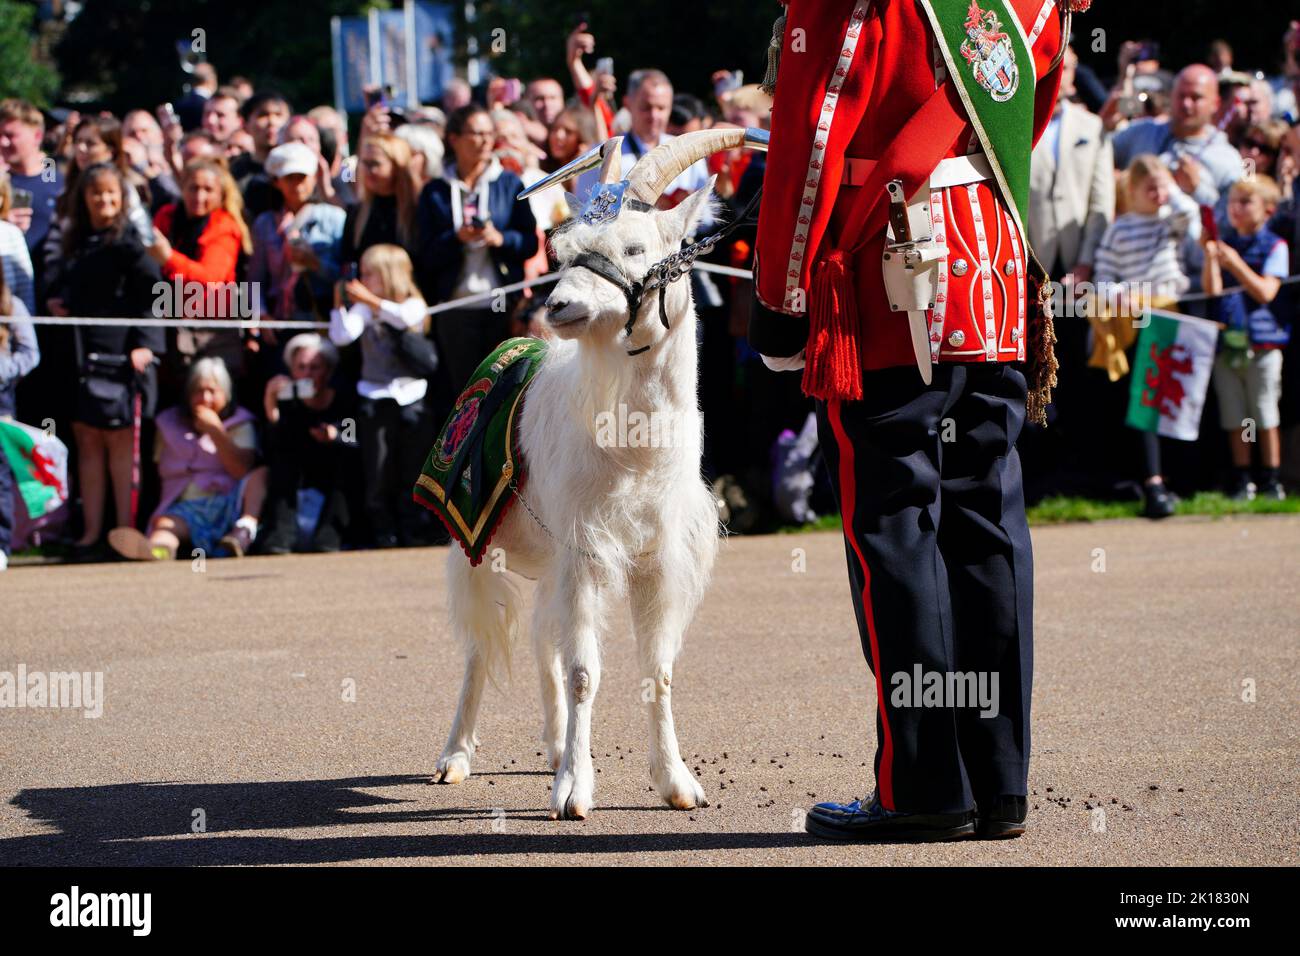 Lance Corporal Shenkin IV, the regimental mascot goat of the Third Battalion of the Royal Welsh regiment waits for King Charles III to arrive at Cardiff Castle in Wales, Britain September 16, 2022. Ben Birchall/Pool via REUTERS Stock Photo